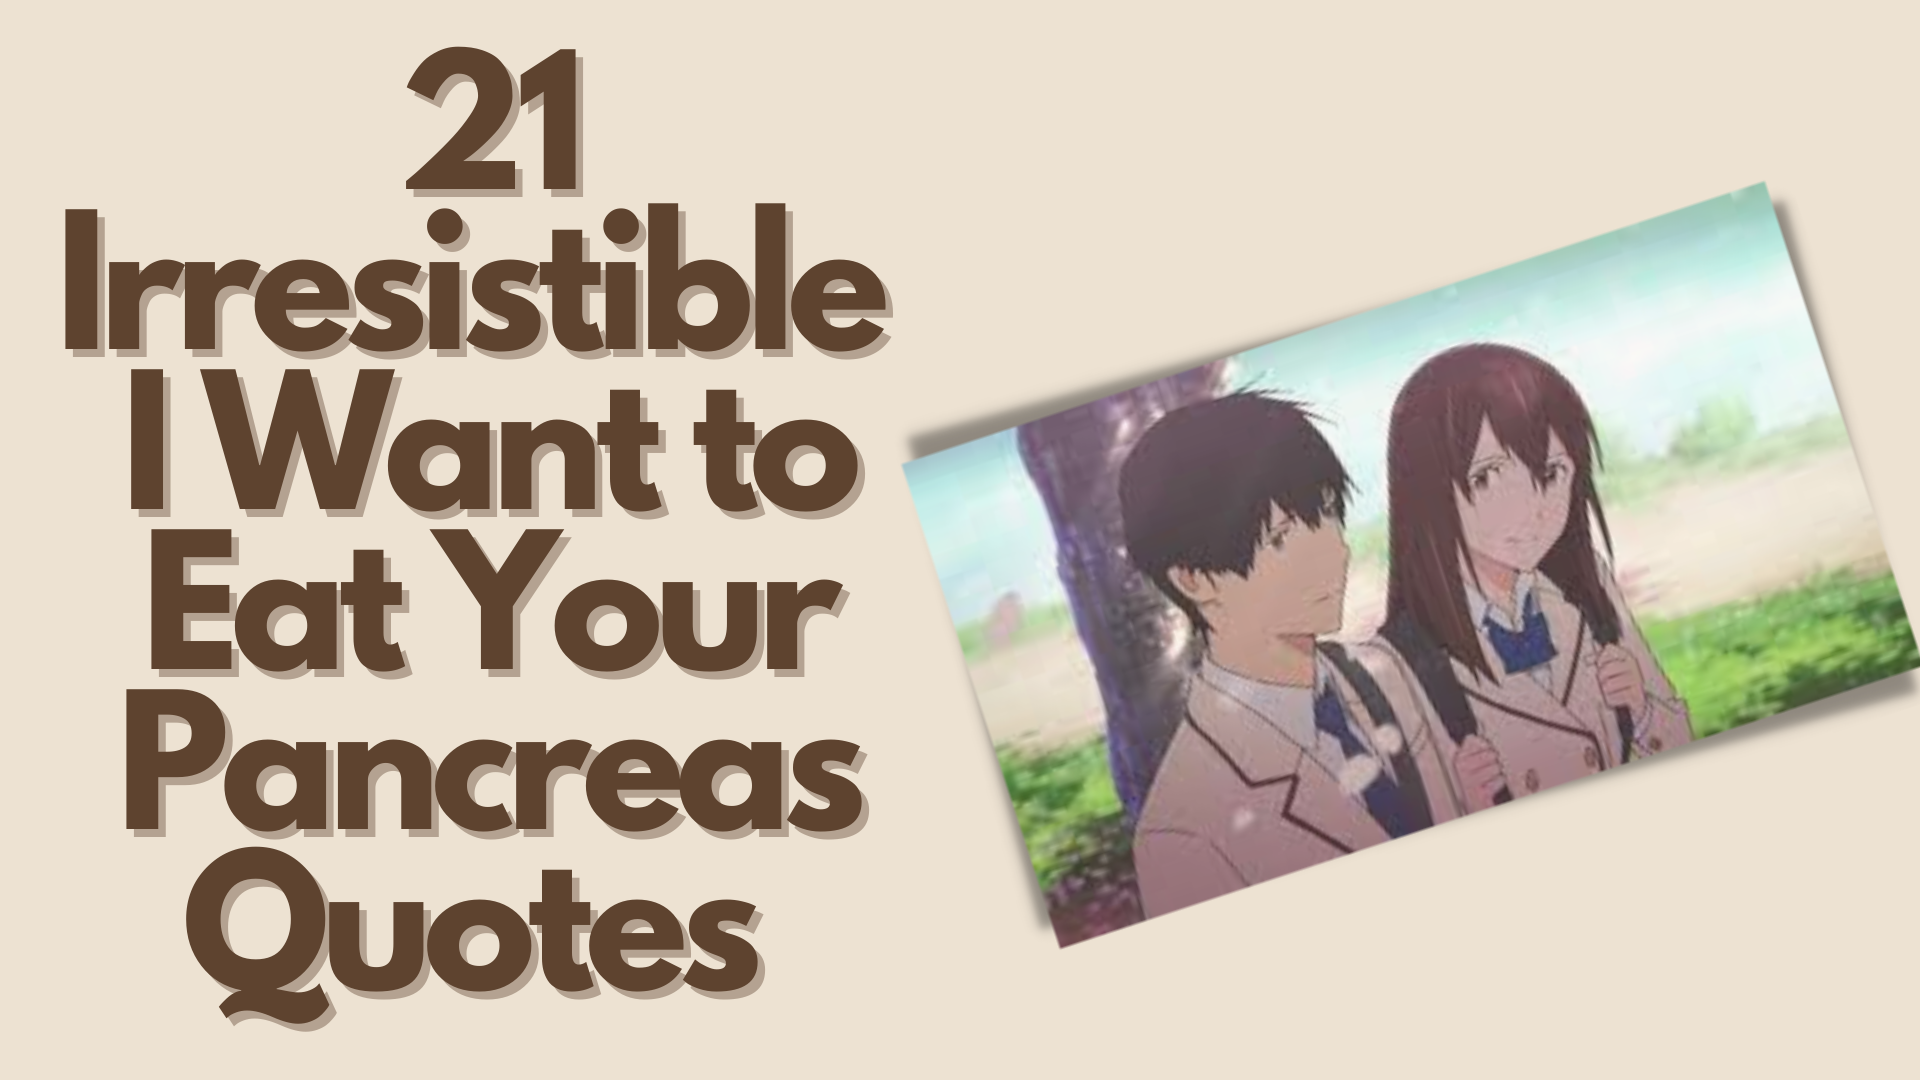 21 Irresistible I Want to Eat Your Pancreas Quotes - Quote Collectors Club